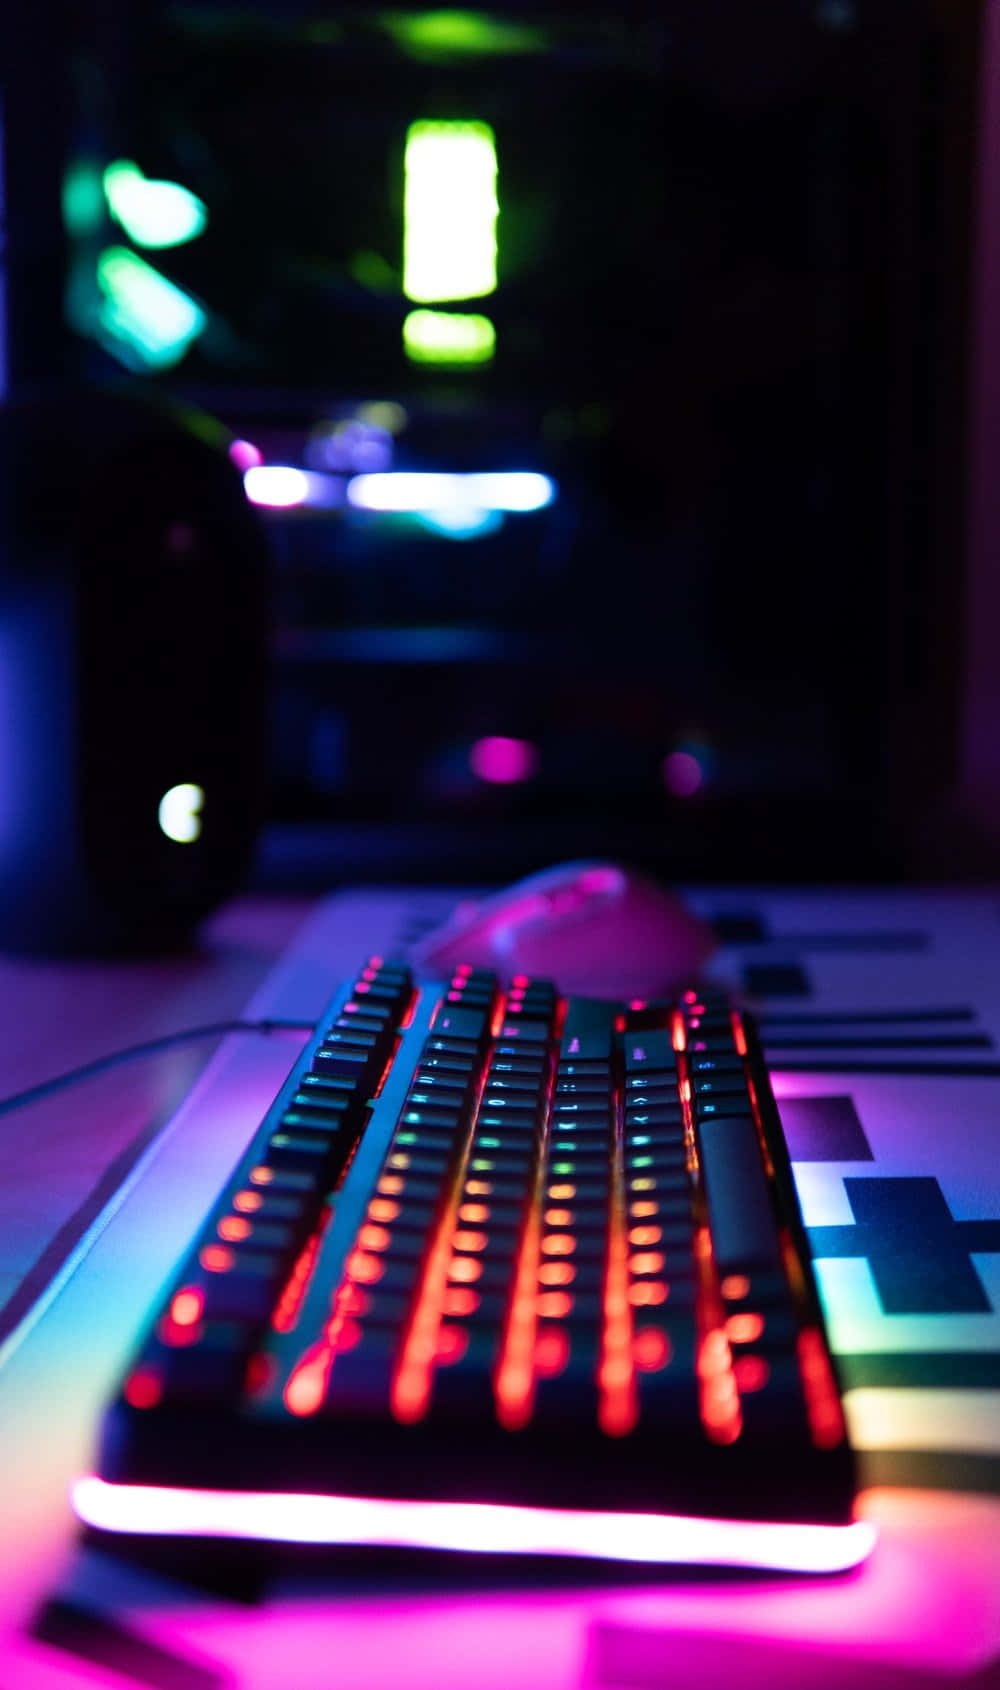 Add some personality to your setup with a cute keyboard